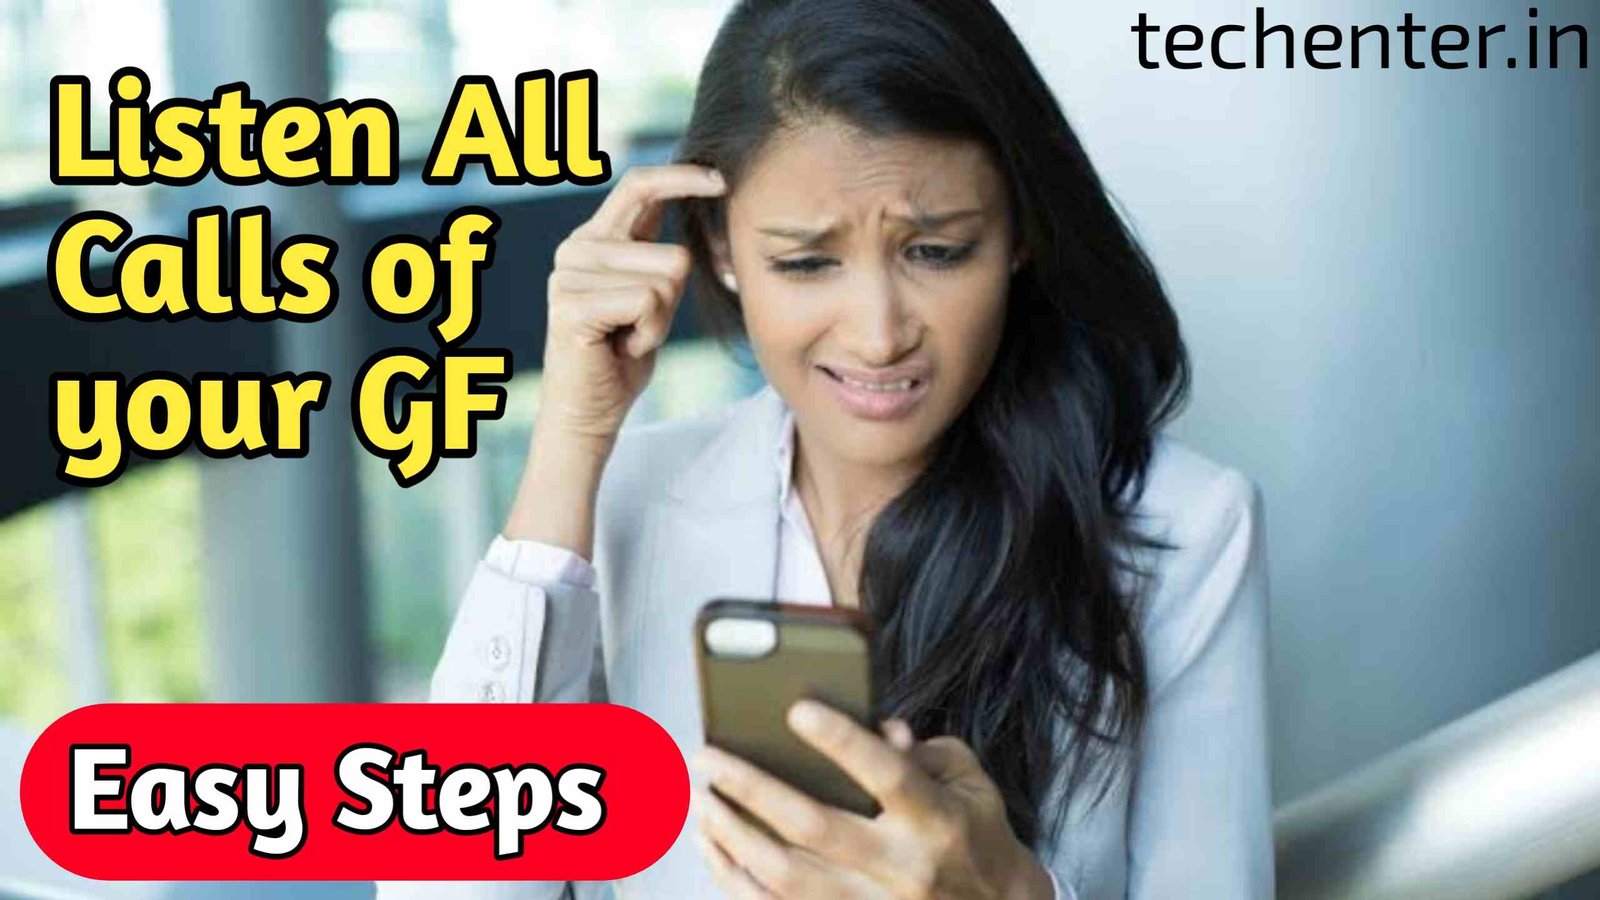 How To Listen To Your Girlfriend’s Phone Calls?